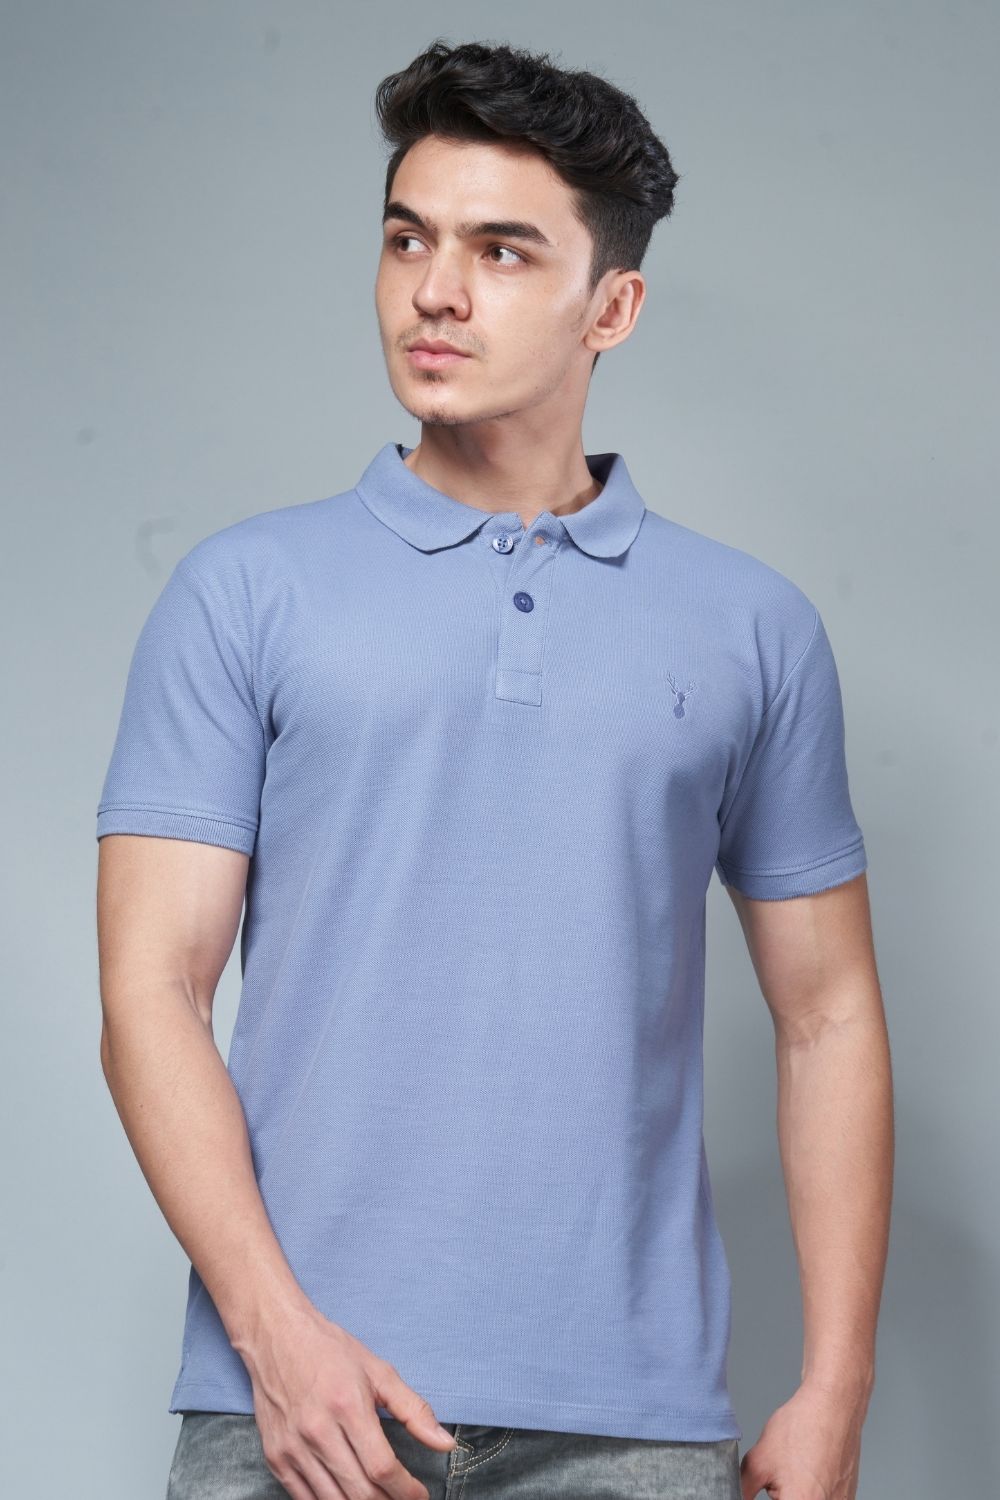 Air Blue colored, identity Polo T-shirts for men with collar and half sleeves, front view.